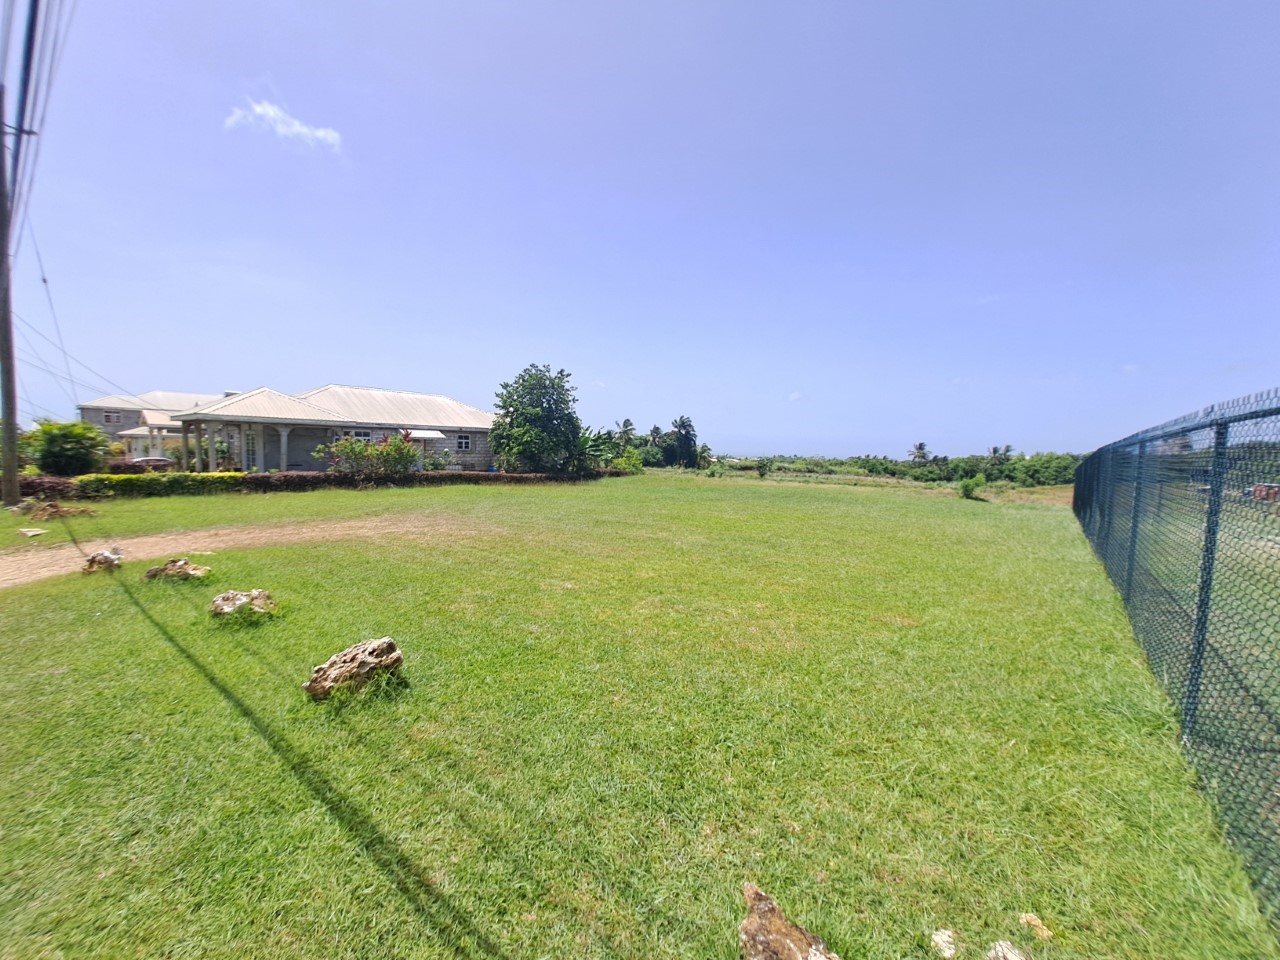 Lot 6 St. Judes | Land for Sale in Saint George Barbados